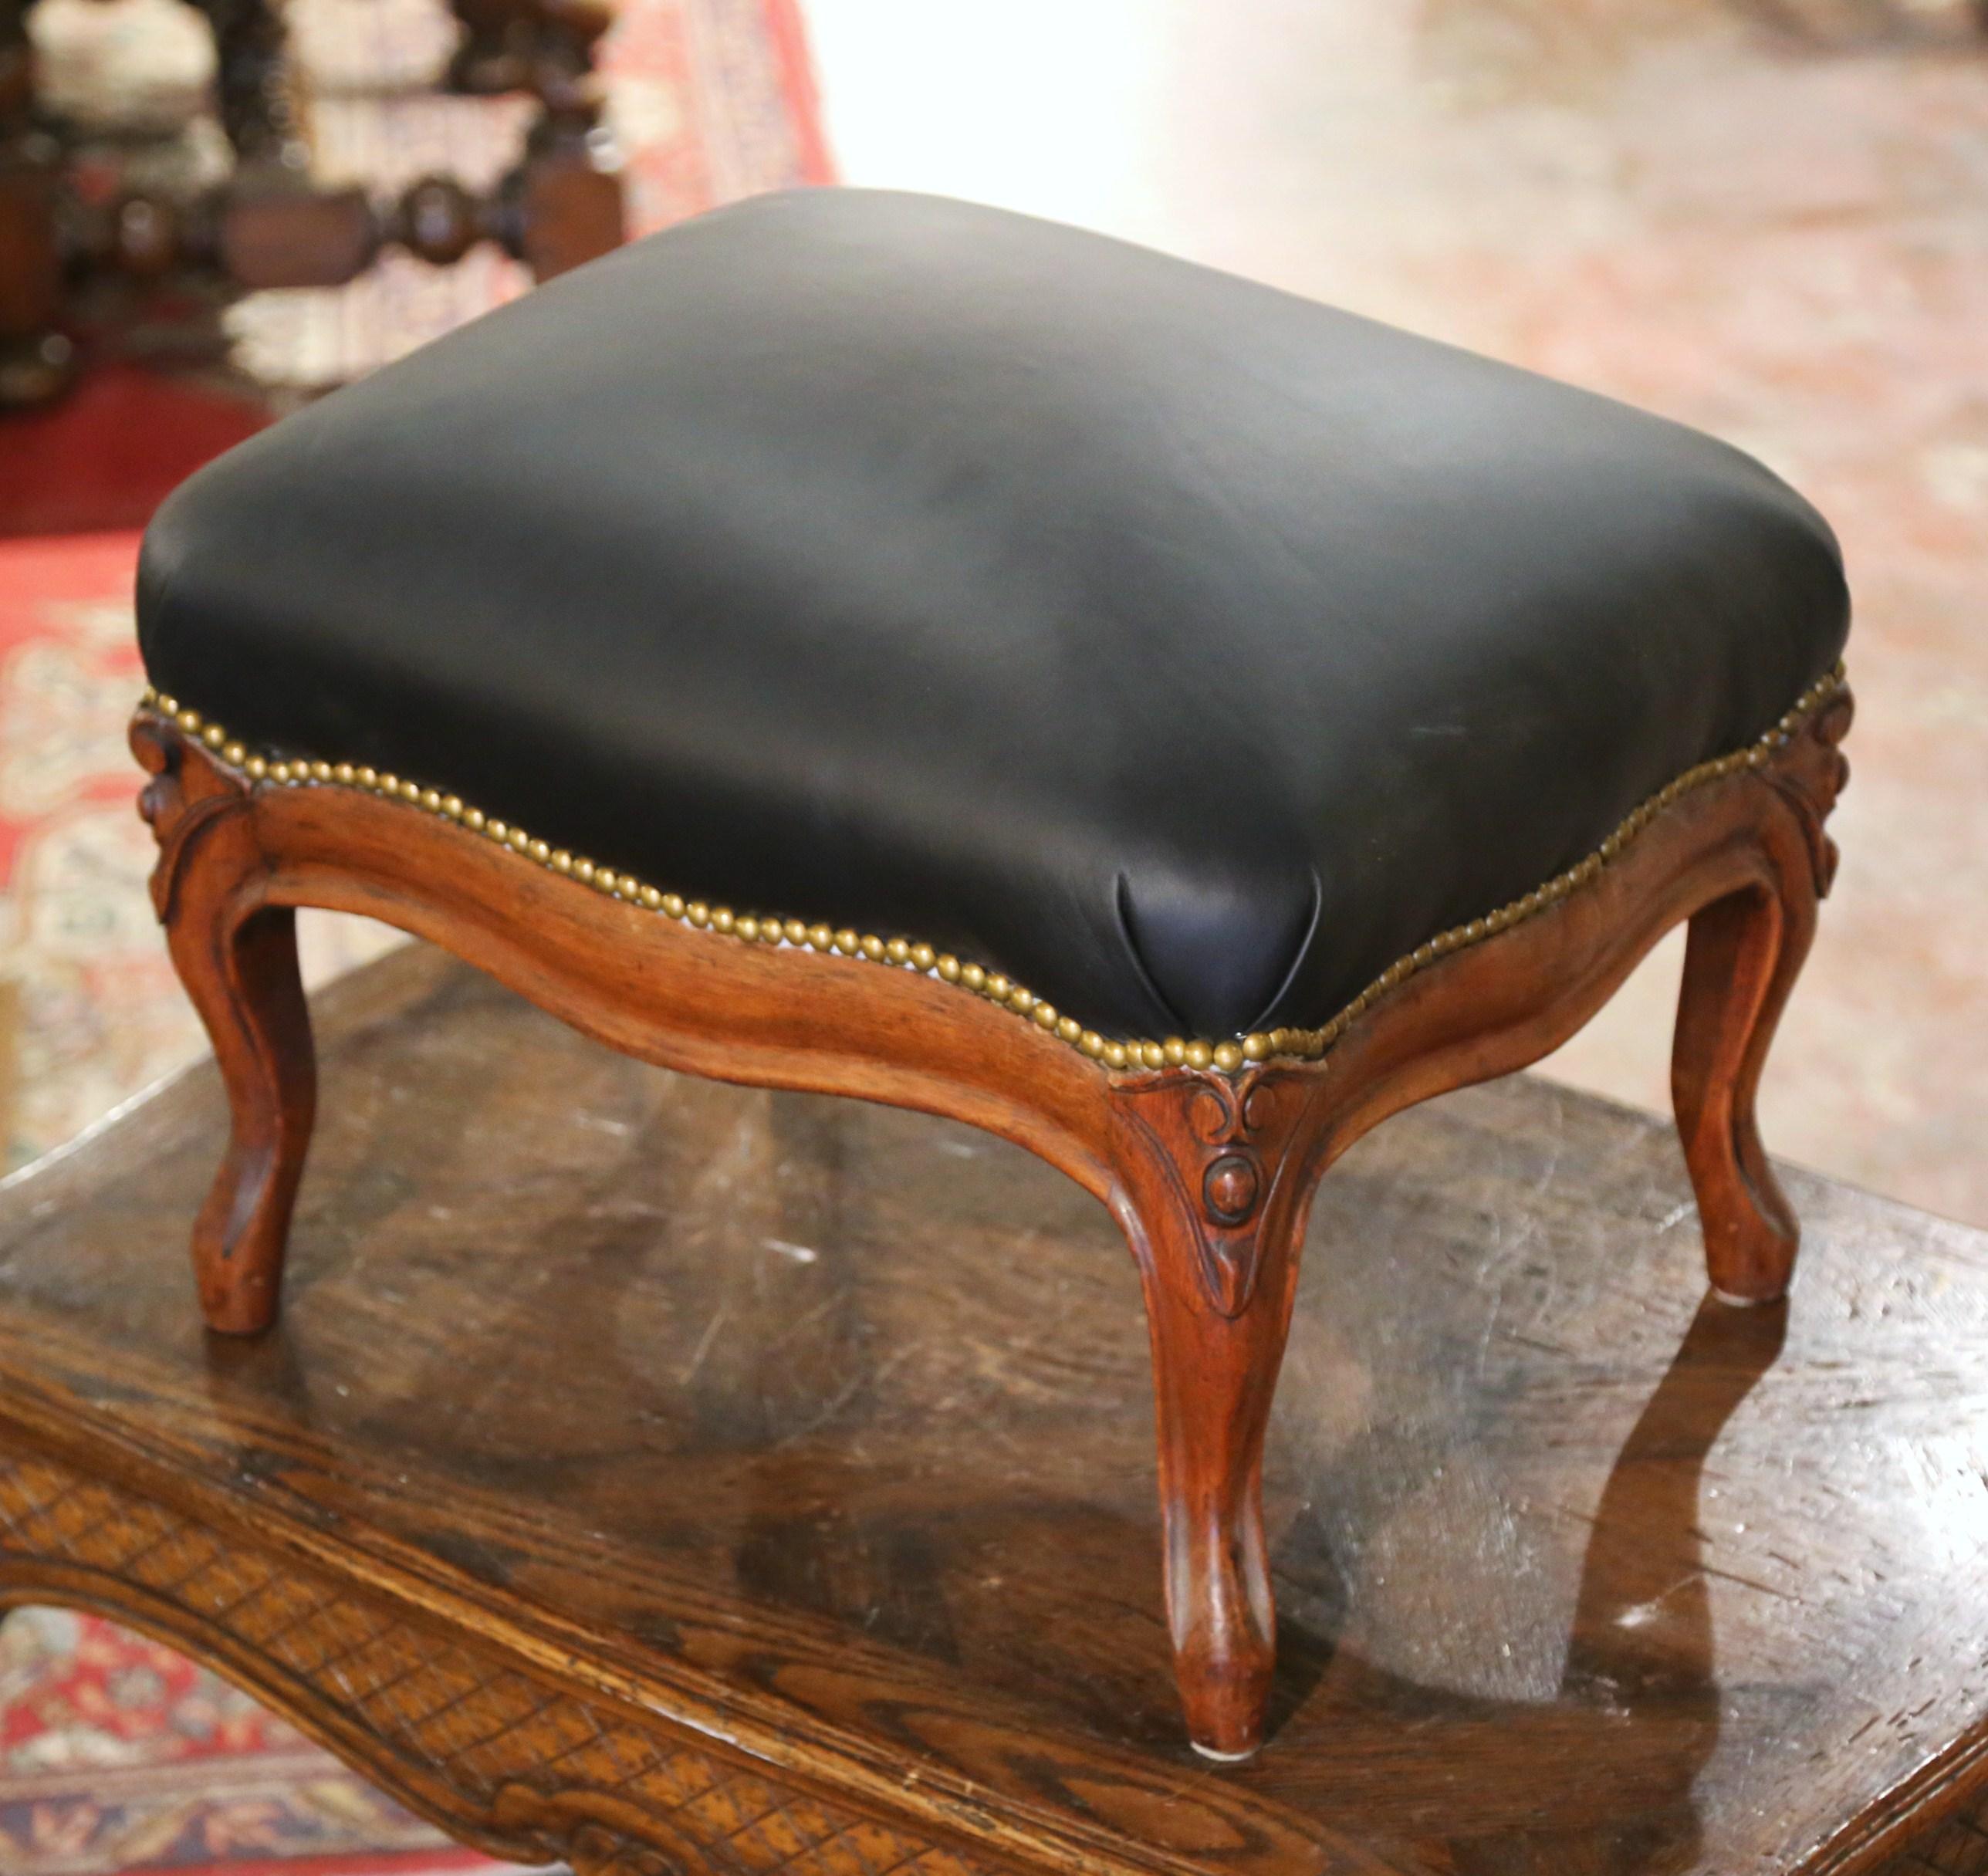 This elegant, antique Louis XV stool was crafted in France, circa 1920. The large rectangular footstool sits on four cabriole legs decorated with scrolled motifs at the shoulders over a scalloped apron. The seat is upholstered with a black leather,